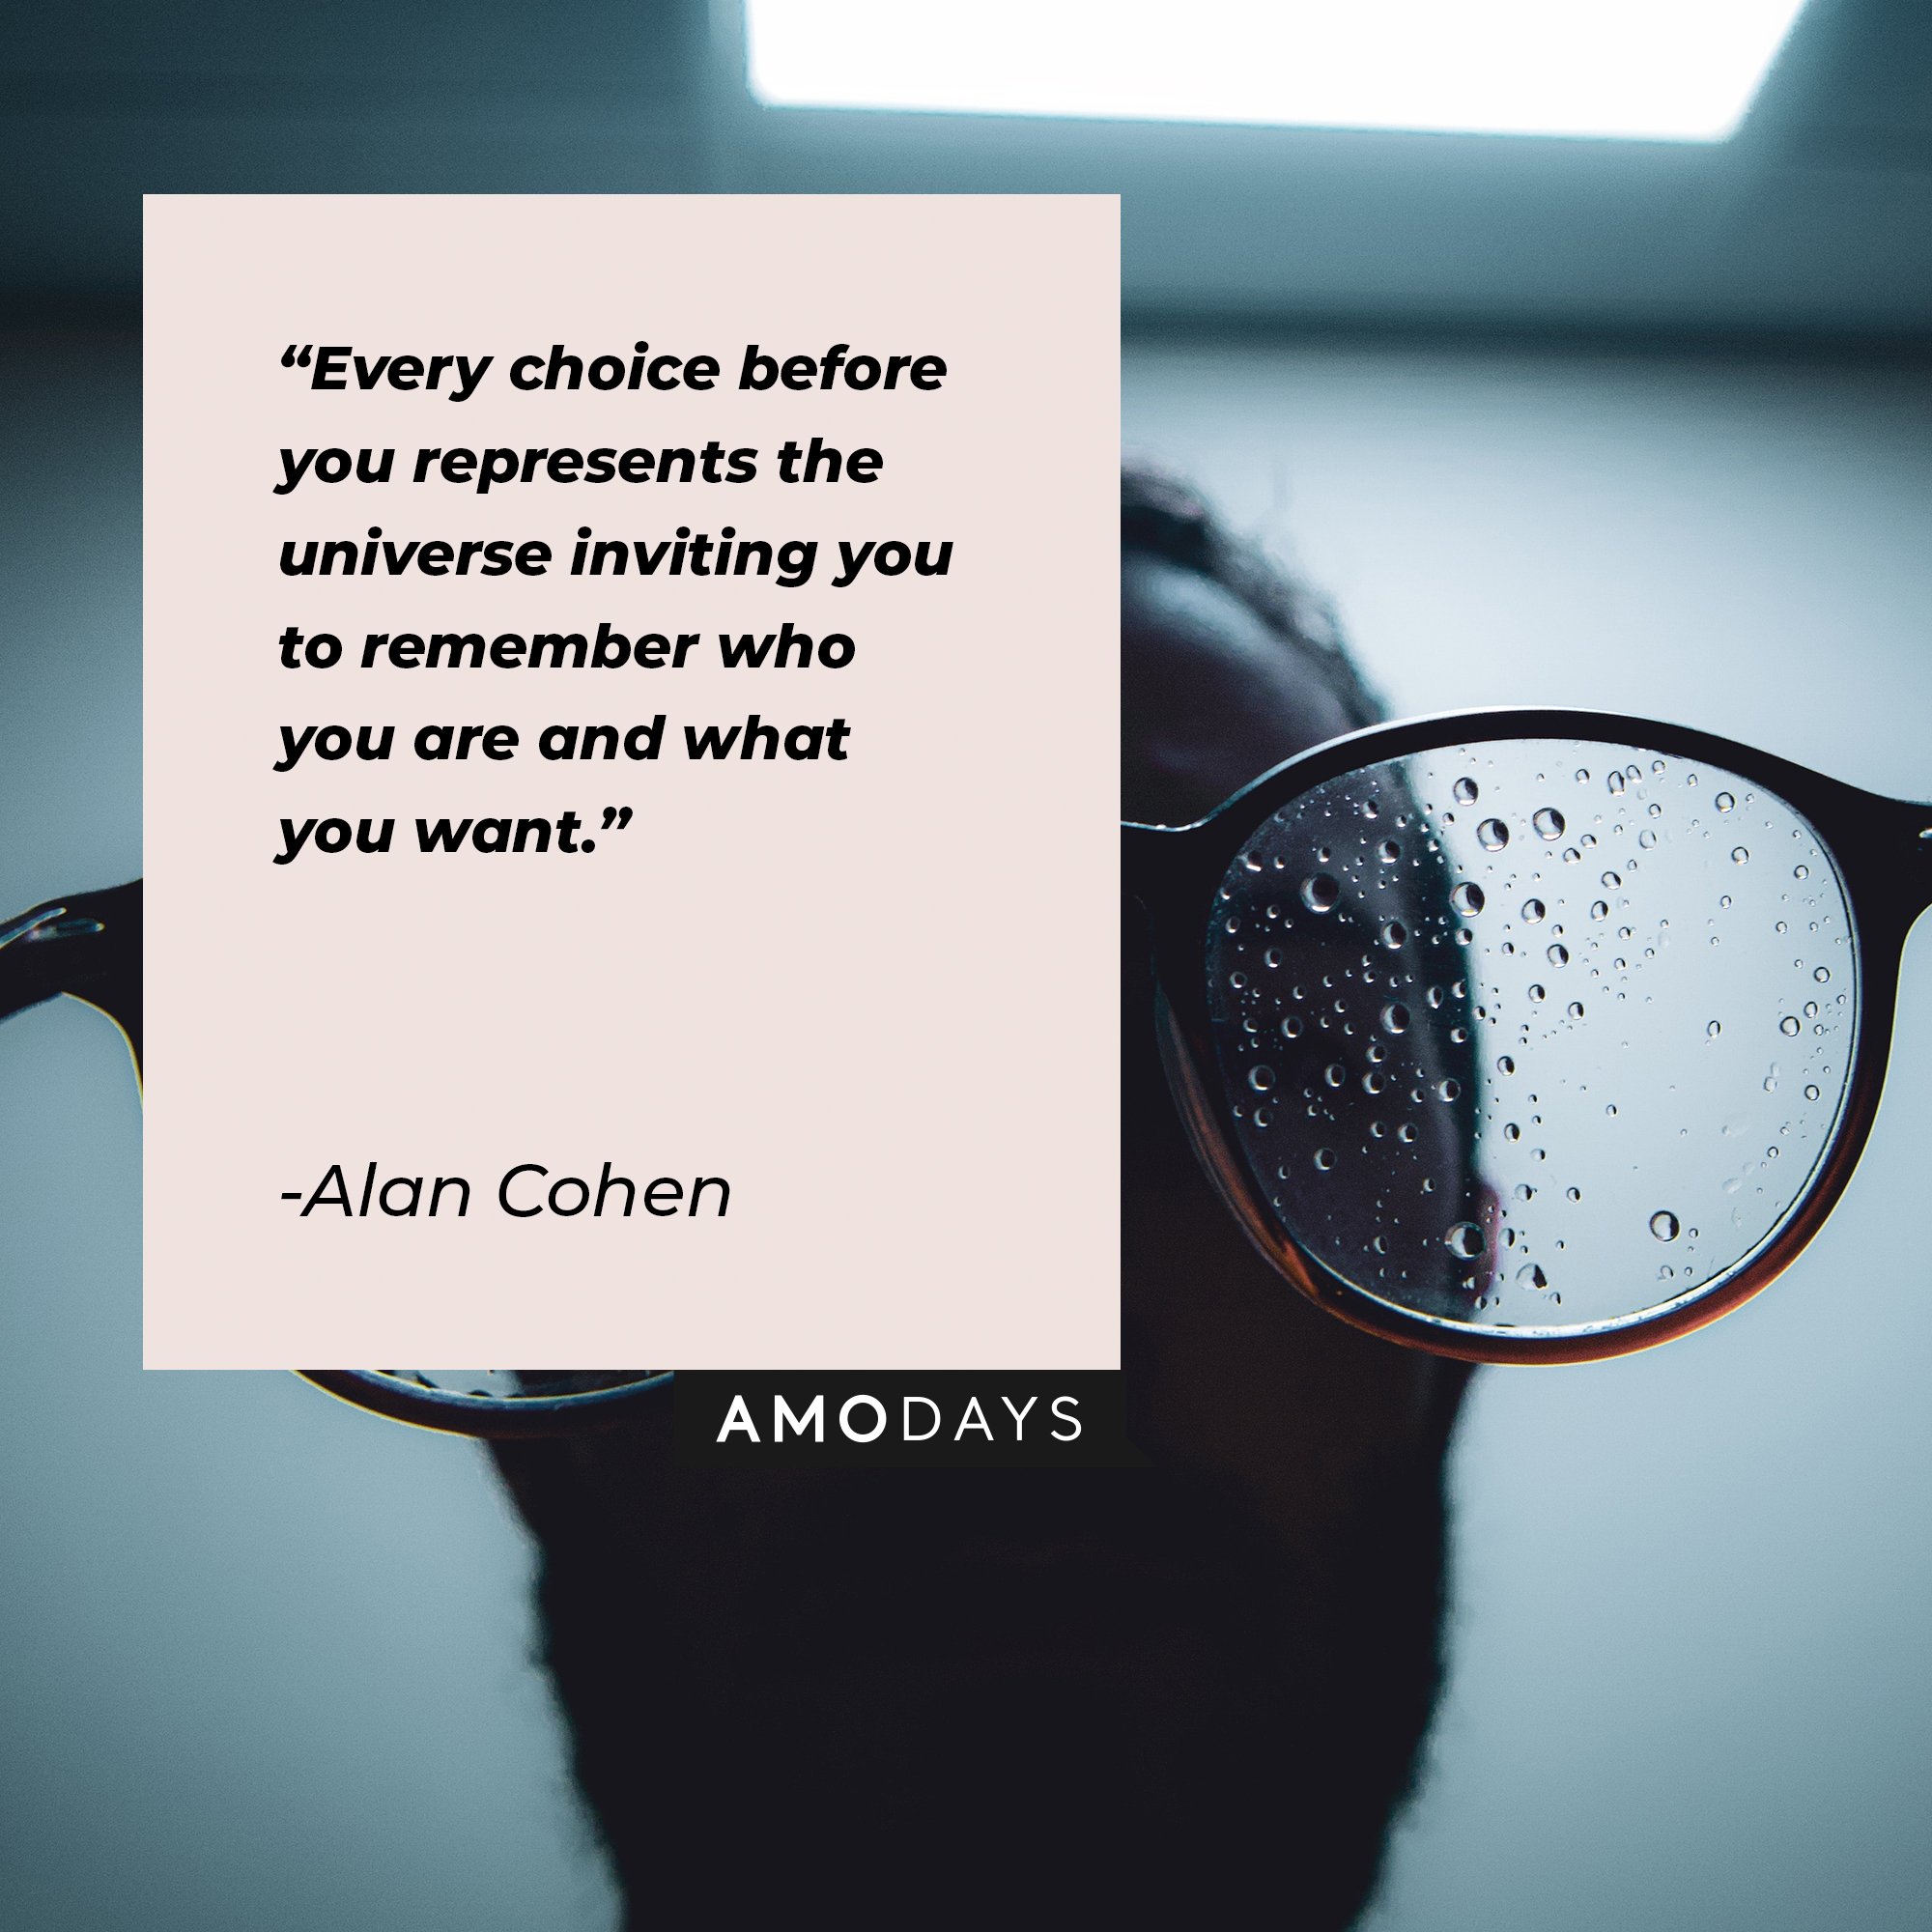 Alan Cohen’s quote: "Every choice before you represents the universe inviting you to remember who you are and what you want." | Image: AmoDays